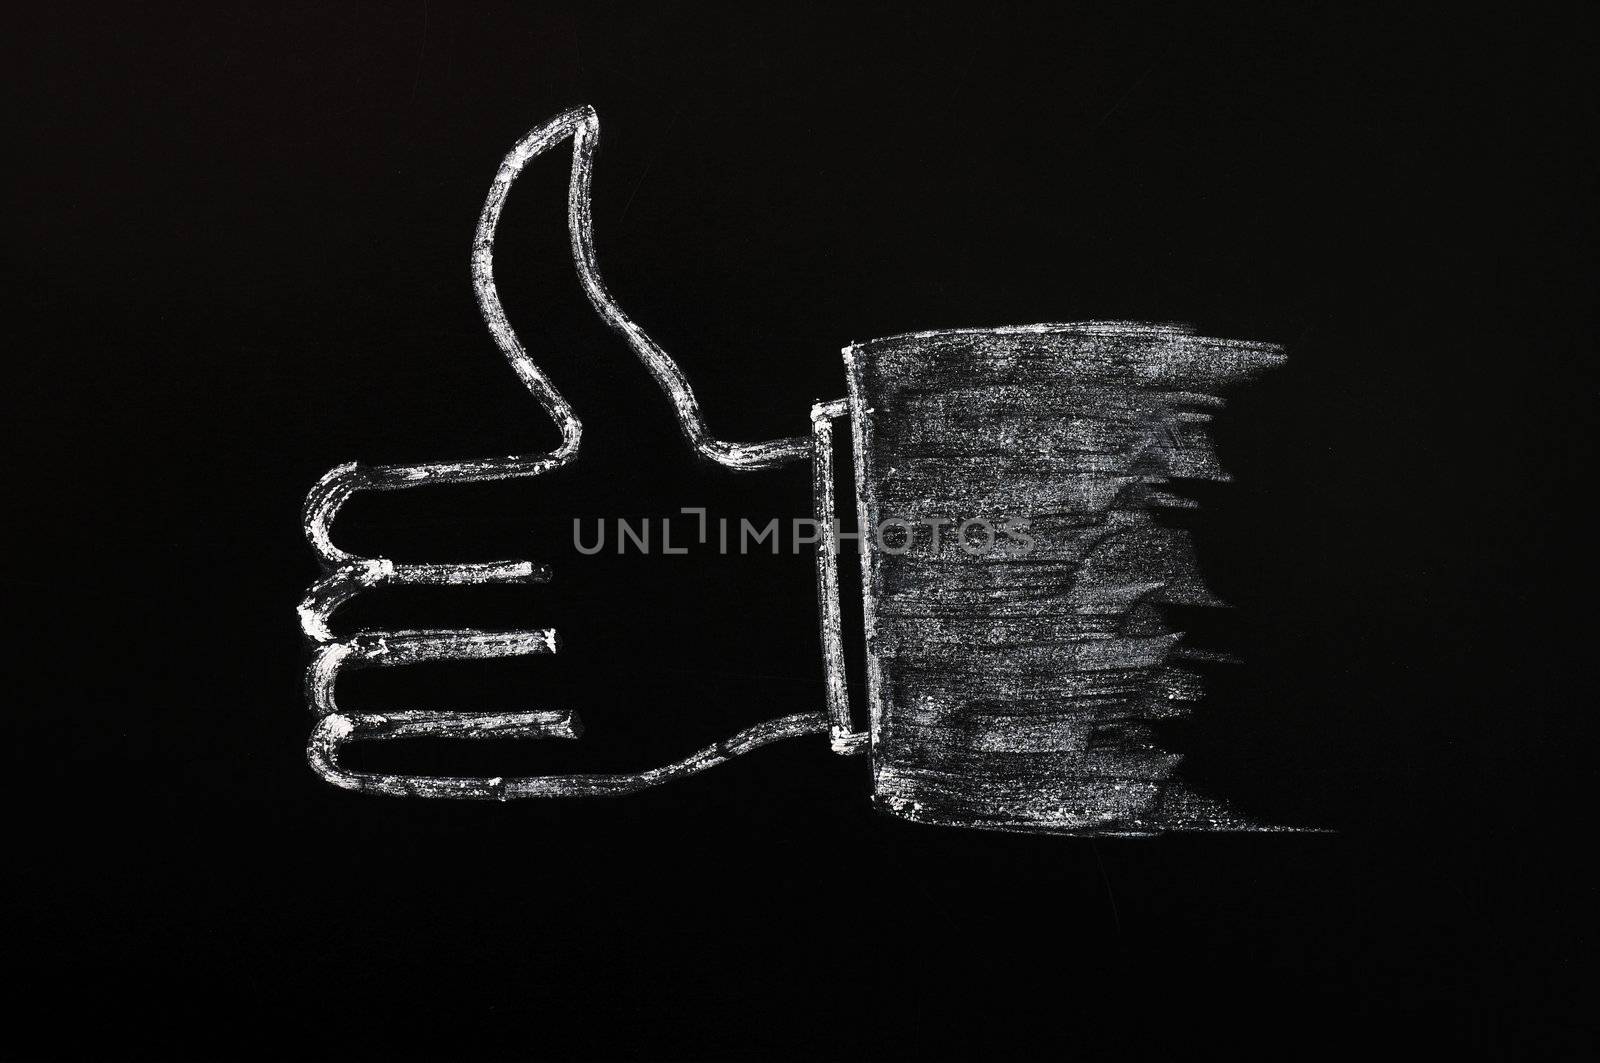 Chalk drawing of thumb up sign on a blackboard background